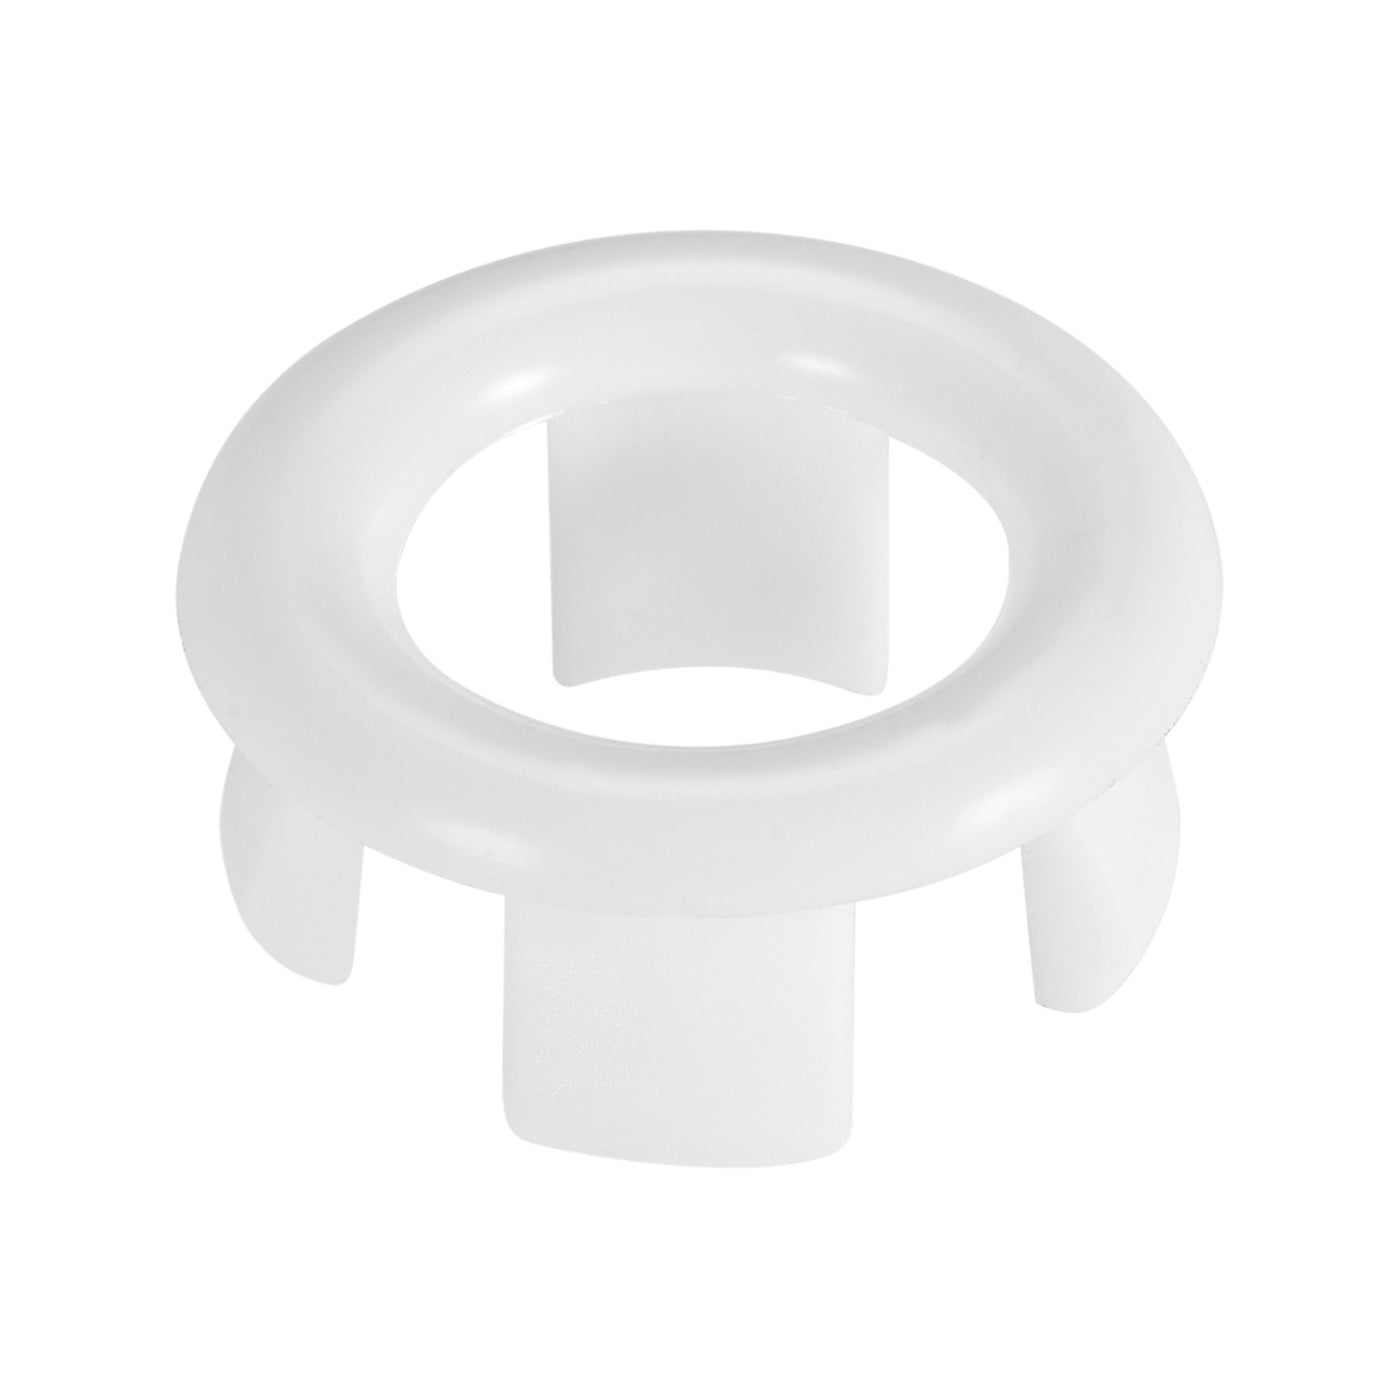 uxcell Uxcell Sink Basin Trim Overflow Cover Insert in Hole Ring Covers Caps White 24pcs